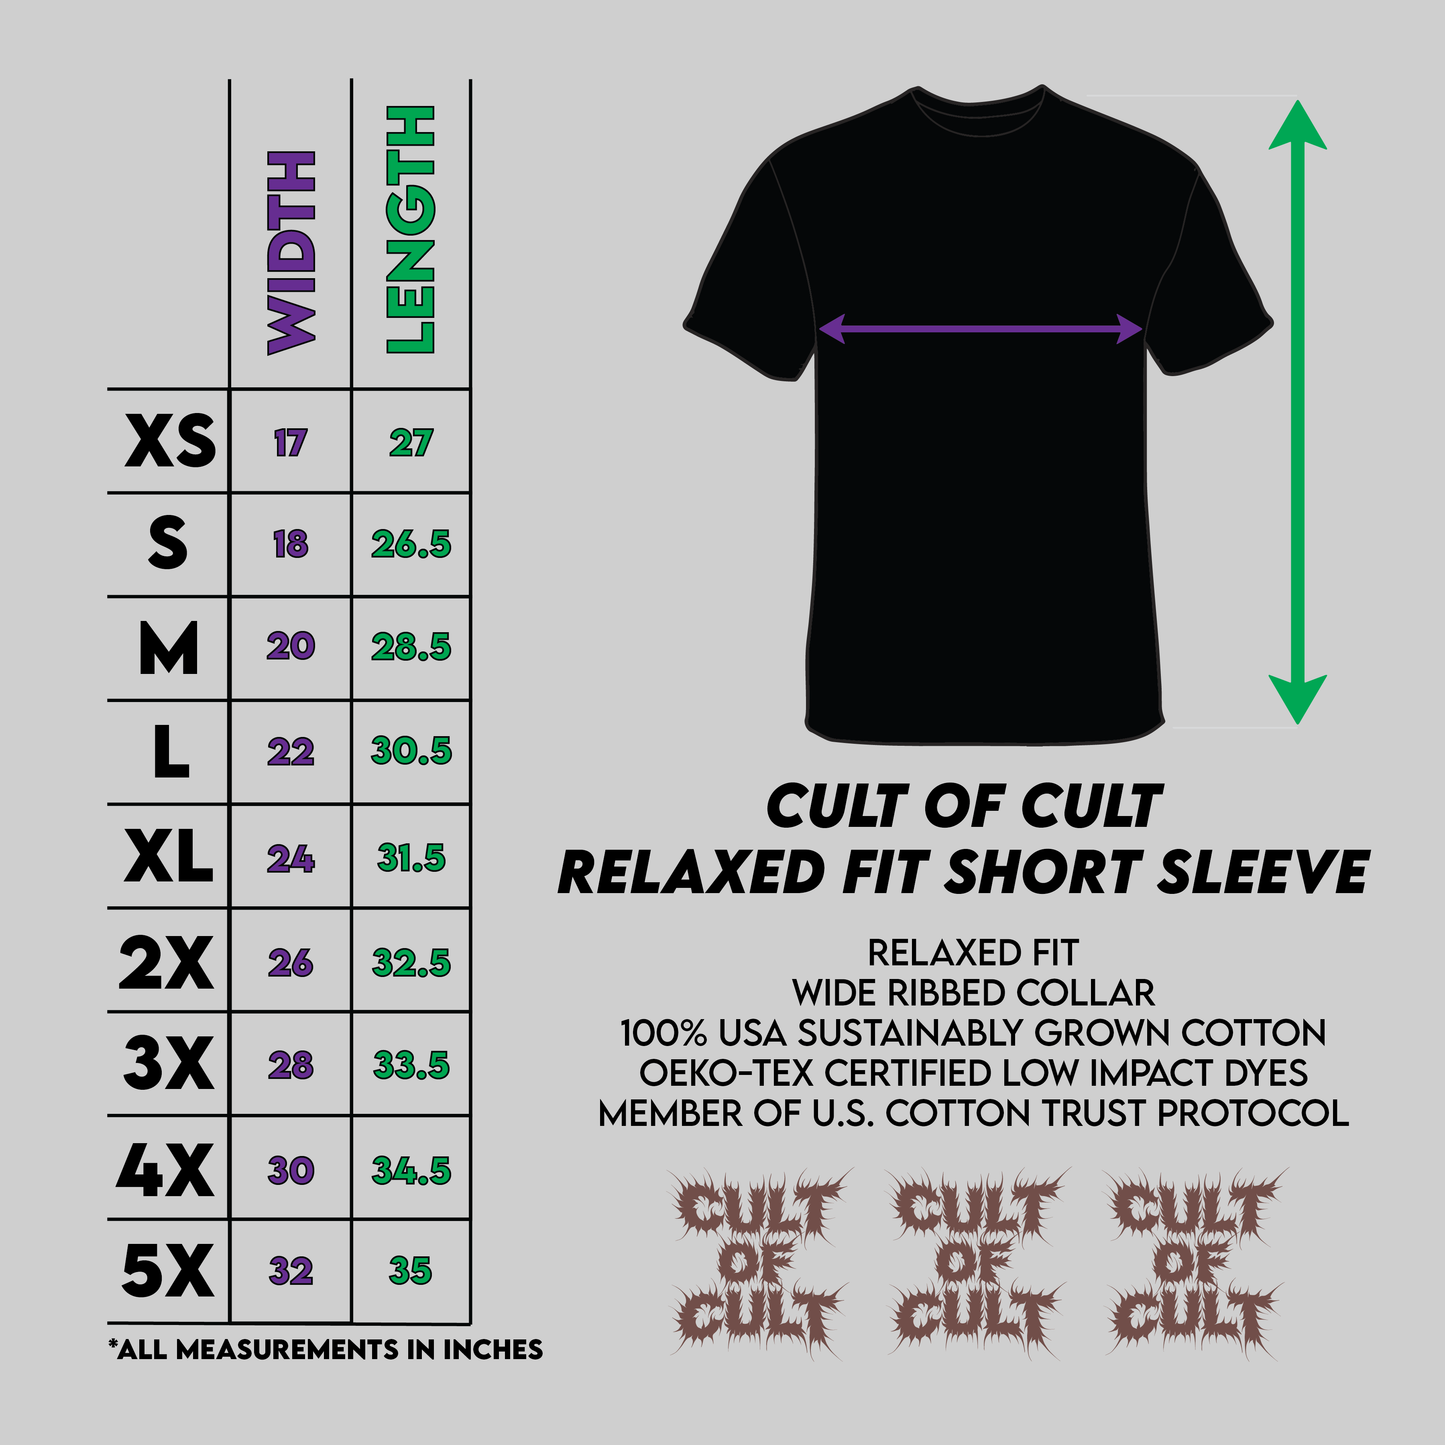 The sizing chart for Cult of Cult short sleeve shirts